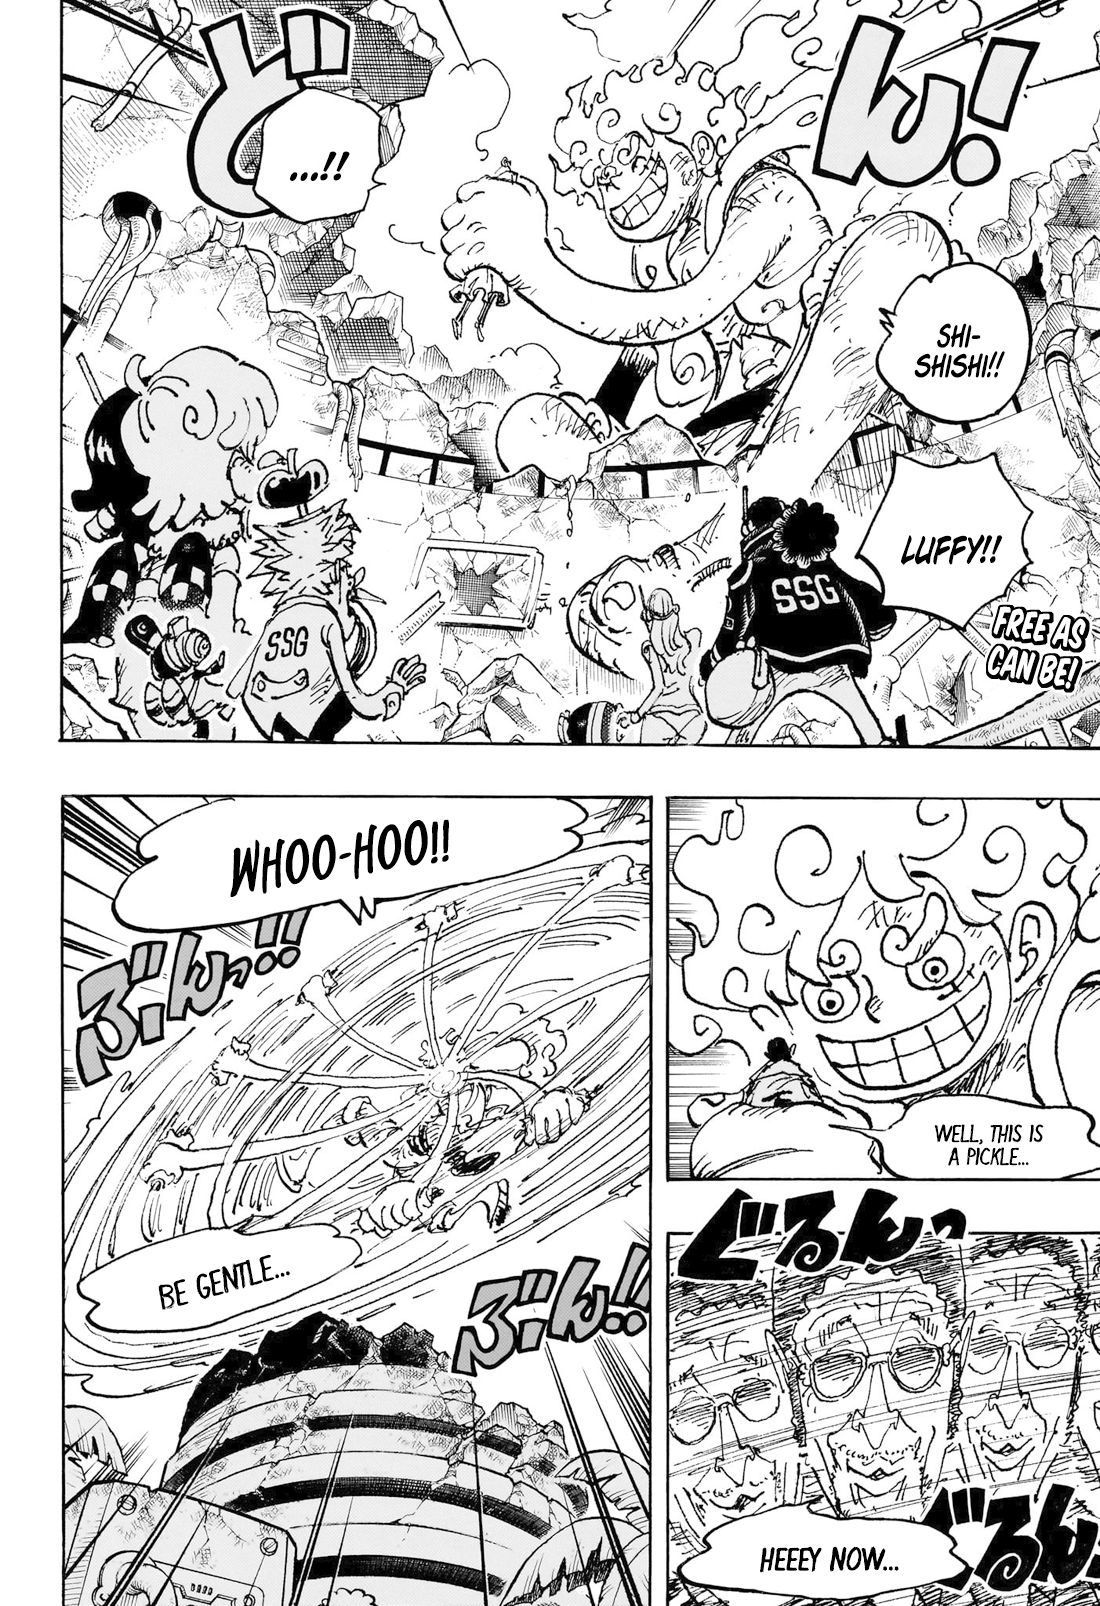 Spoiler - One Piece Chapter 1061 Spoilers Discussion, Page 295